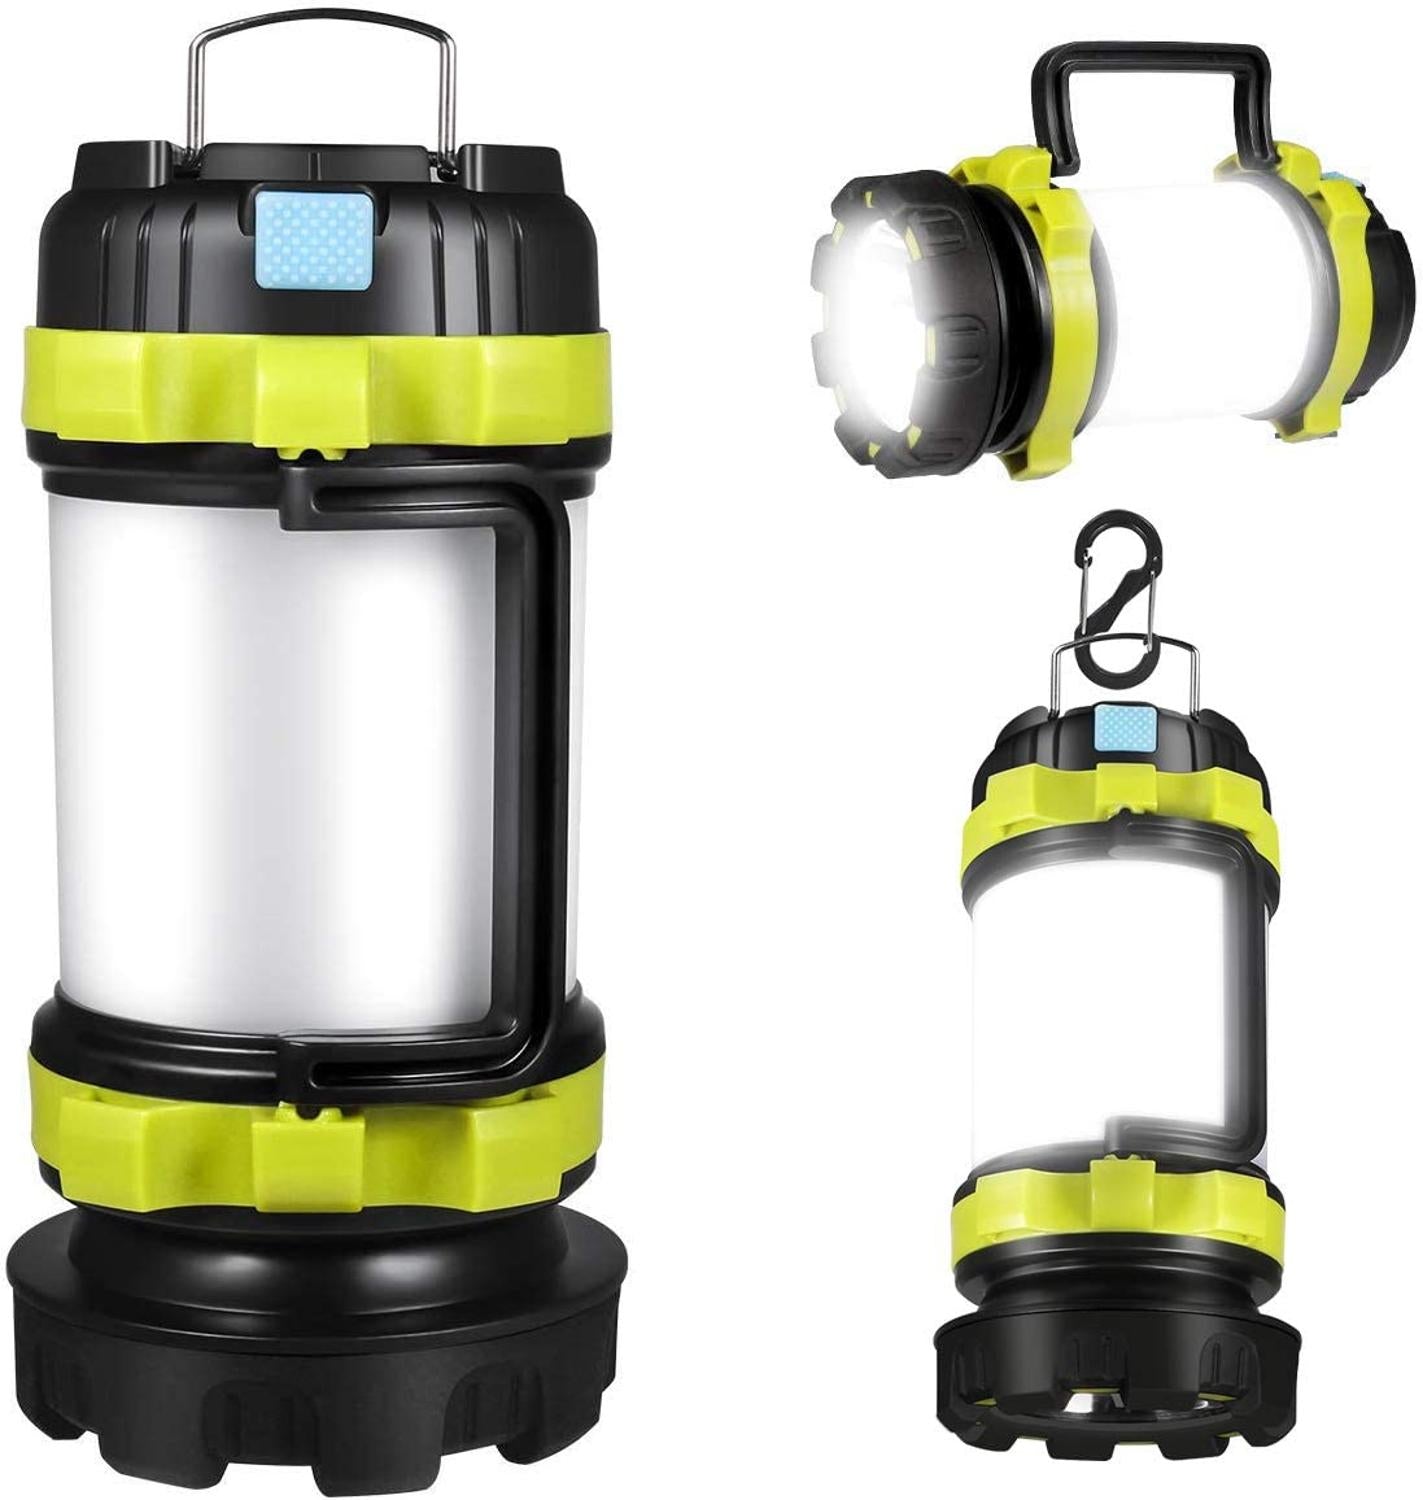 Portable Rechargeable Camping Light and Power Bank